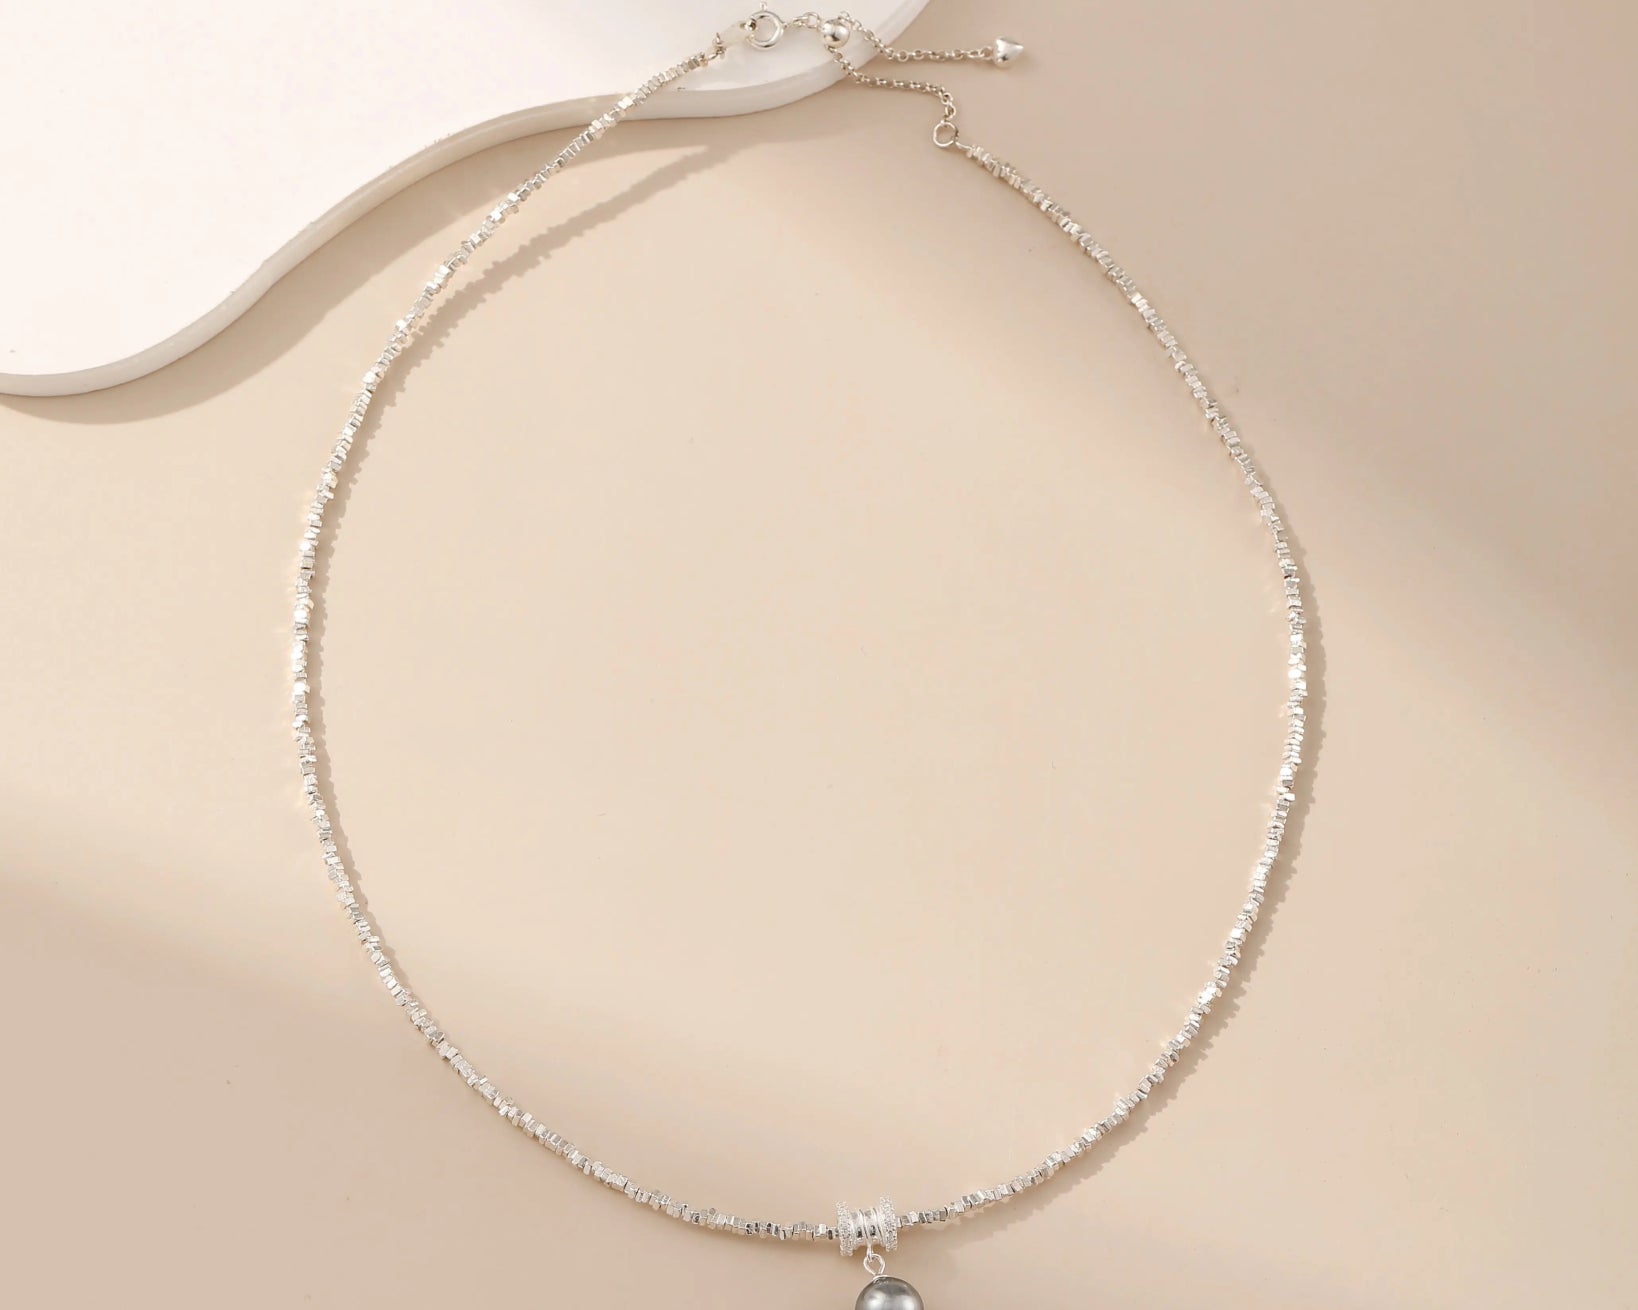 French Pearl Shard Silver Necklace - Alarita